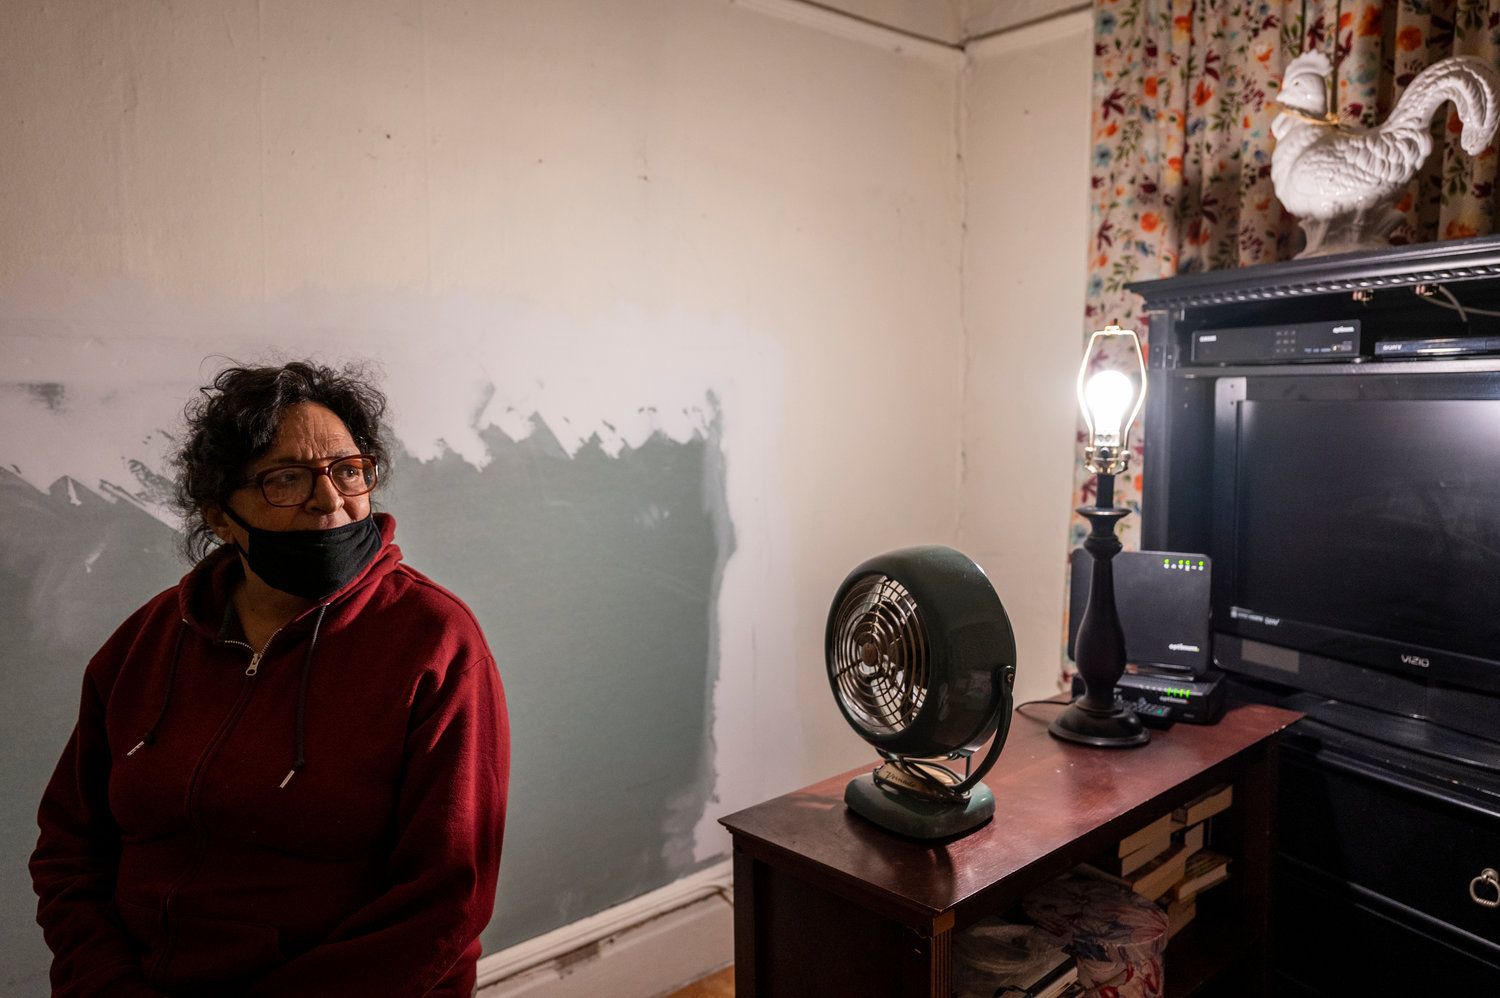 Regina Hall has lived at 3801 Review Place for 50 years, but says over the last few years, unwelcome guests from the rodent family have joined her. Even when a new landlord took over, Hall says the mouse infestation only got worse.